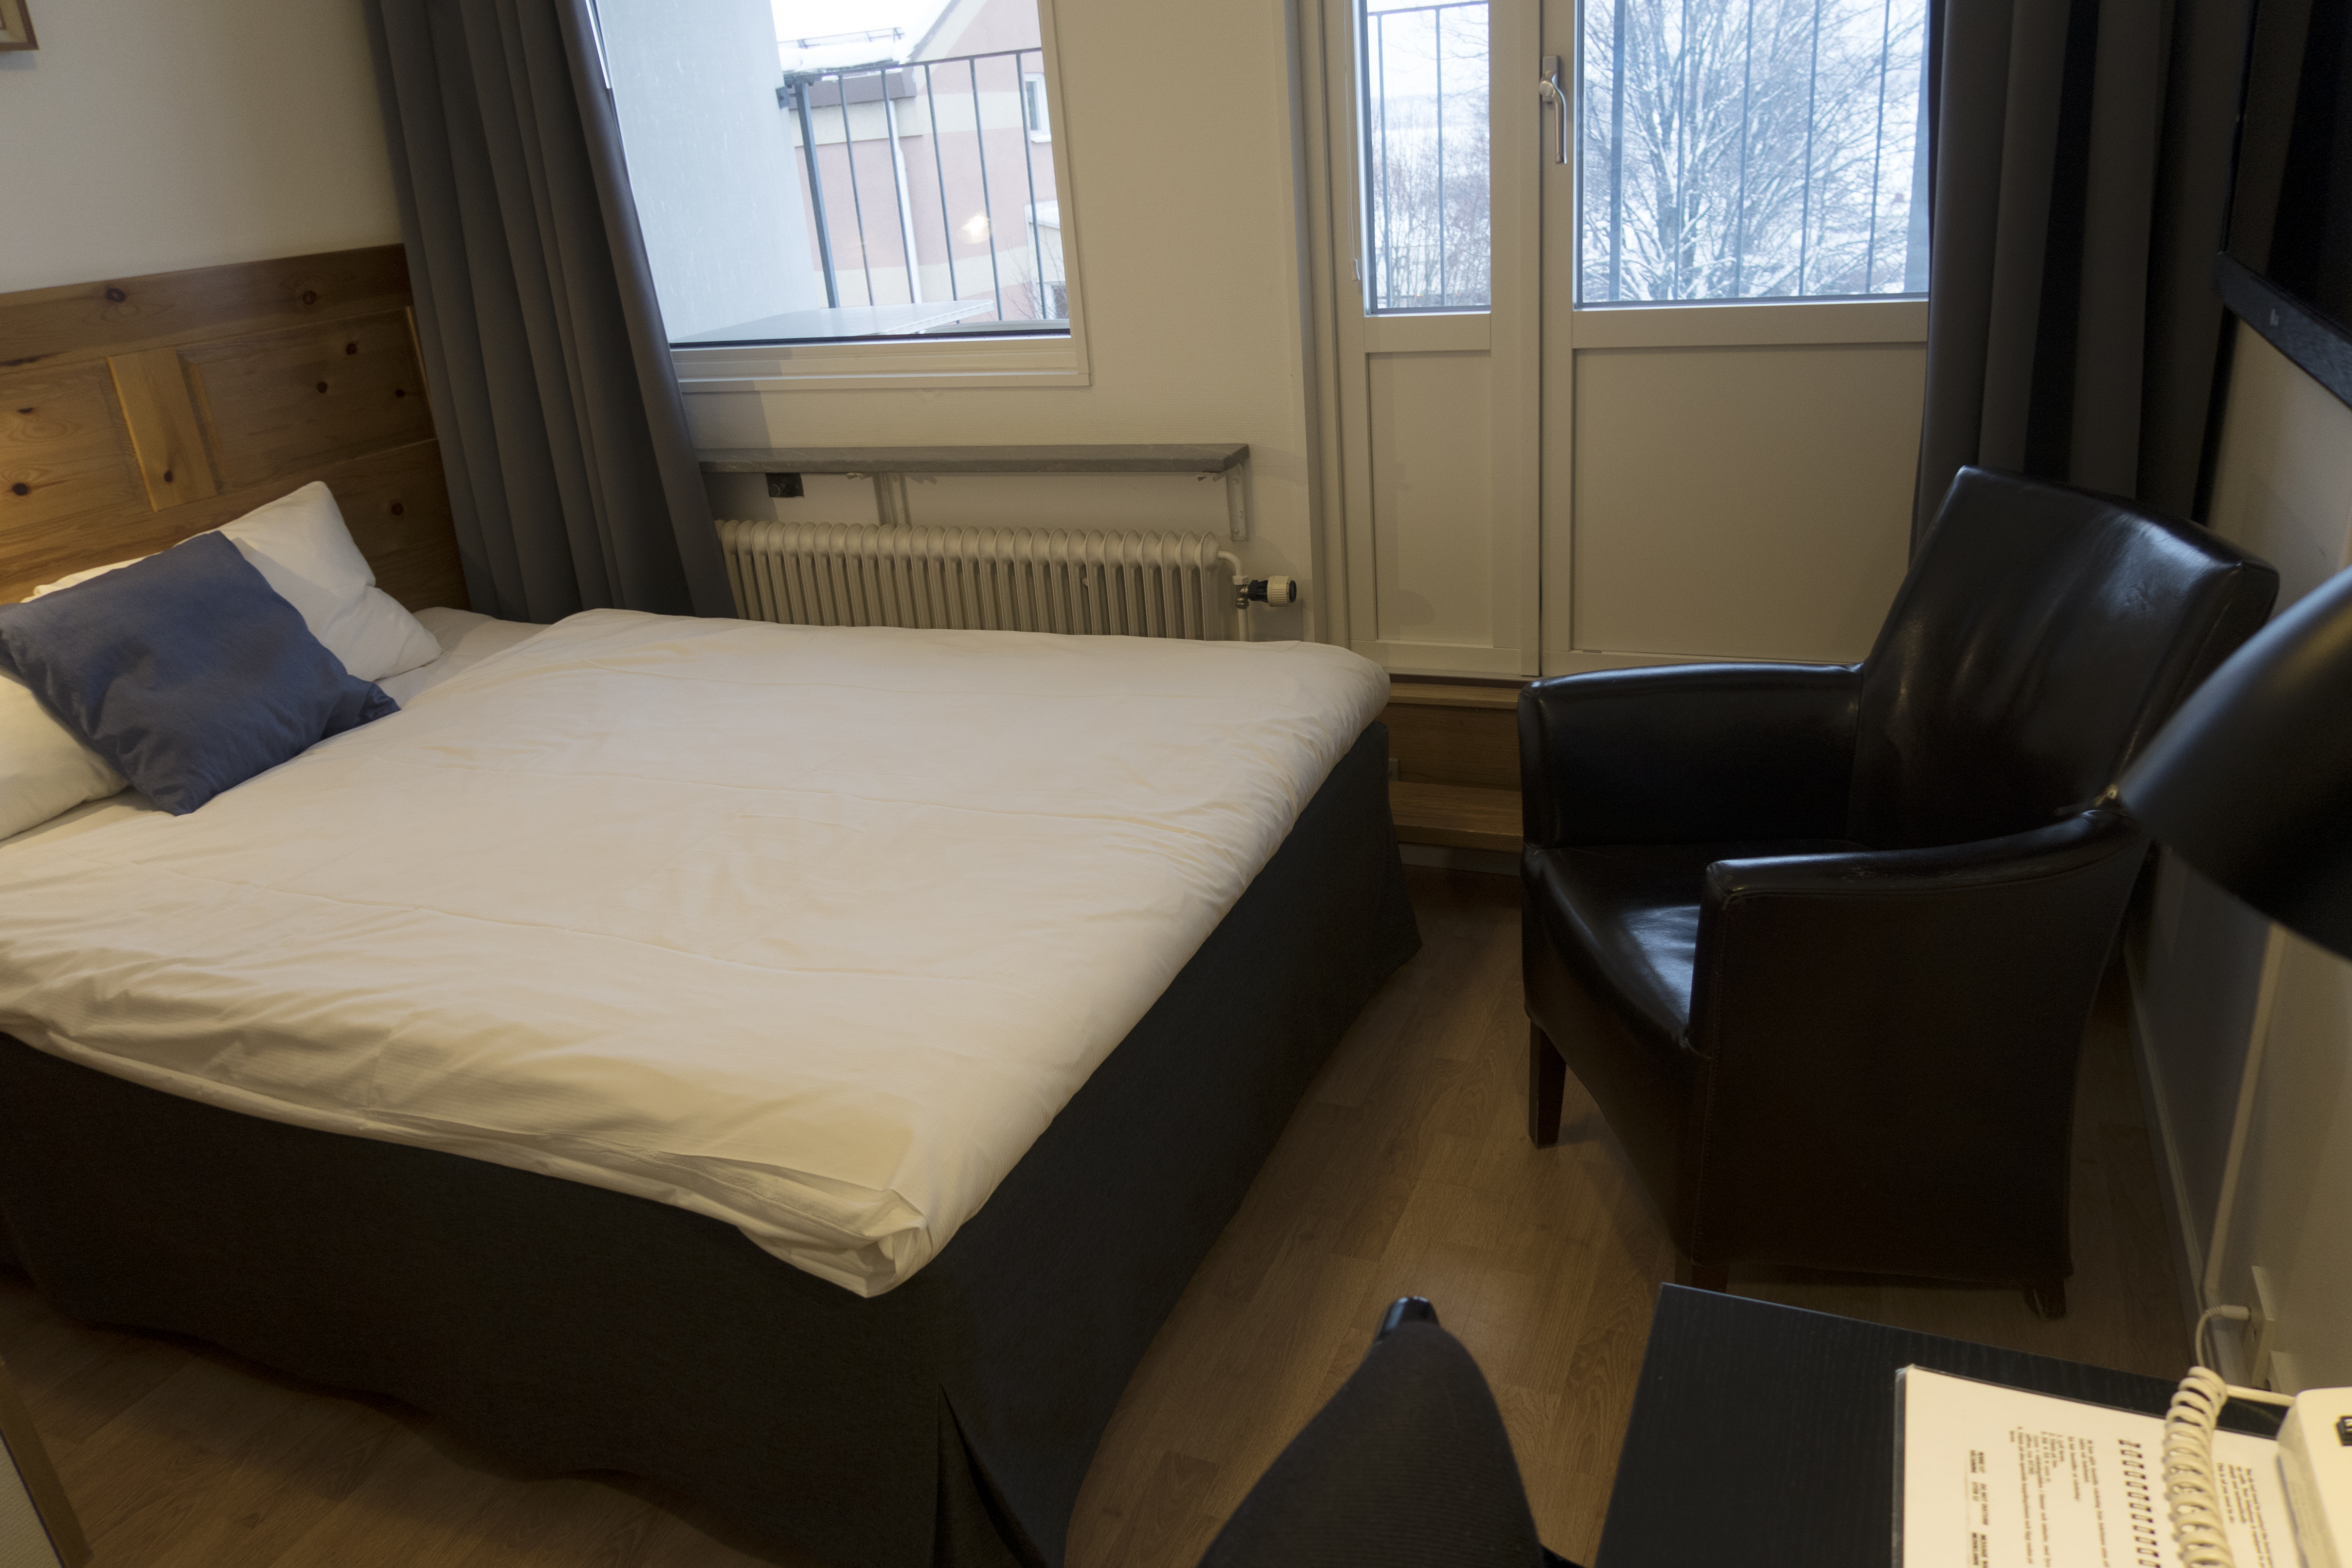 Hotel room with beds, black leather armchair and balcony